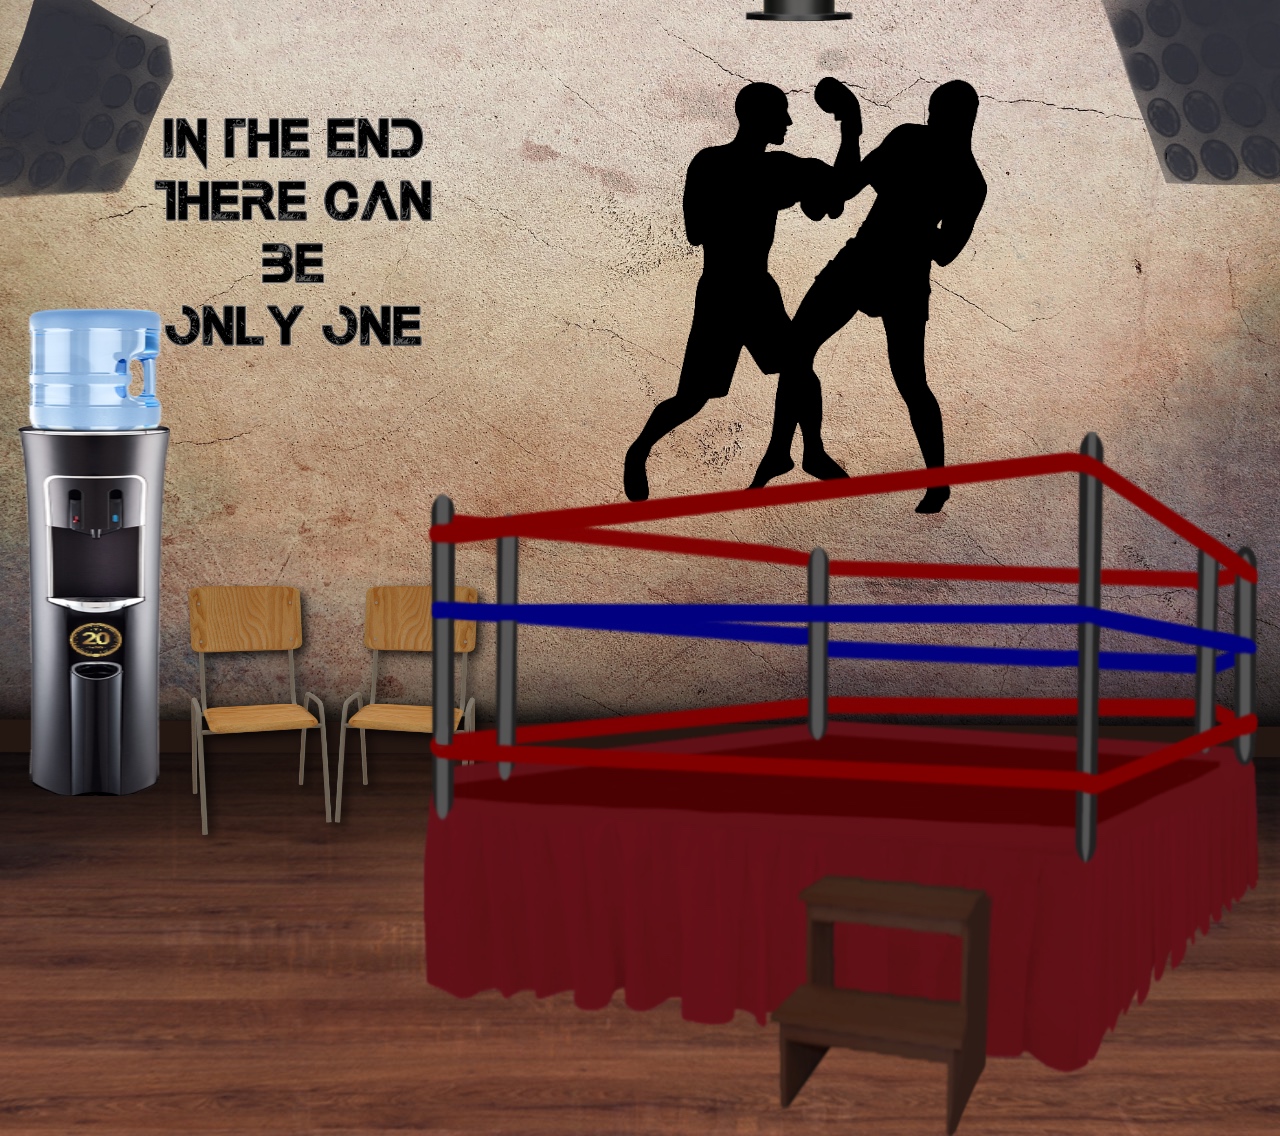 INT. BOXING RING – DAY